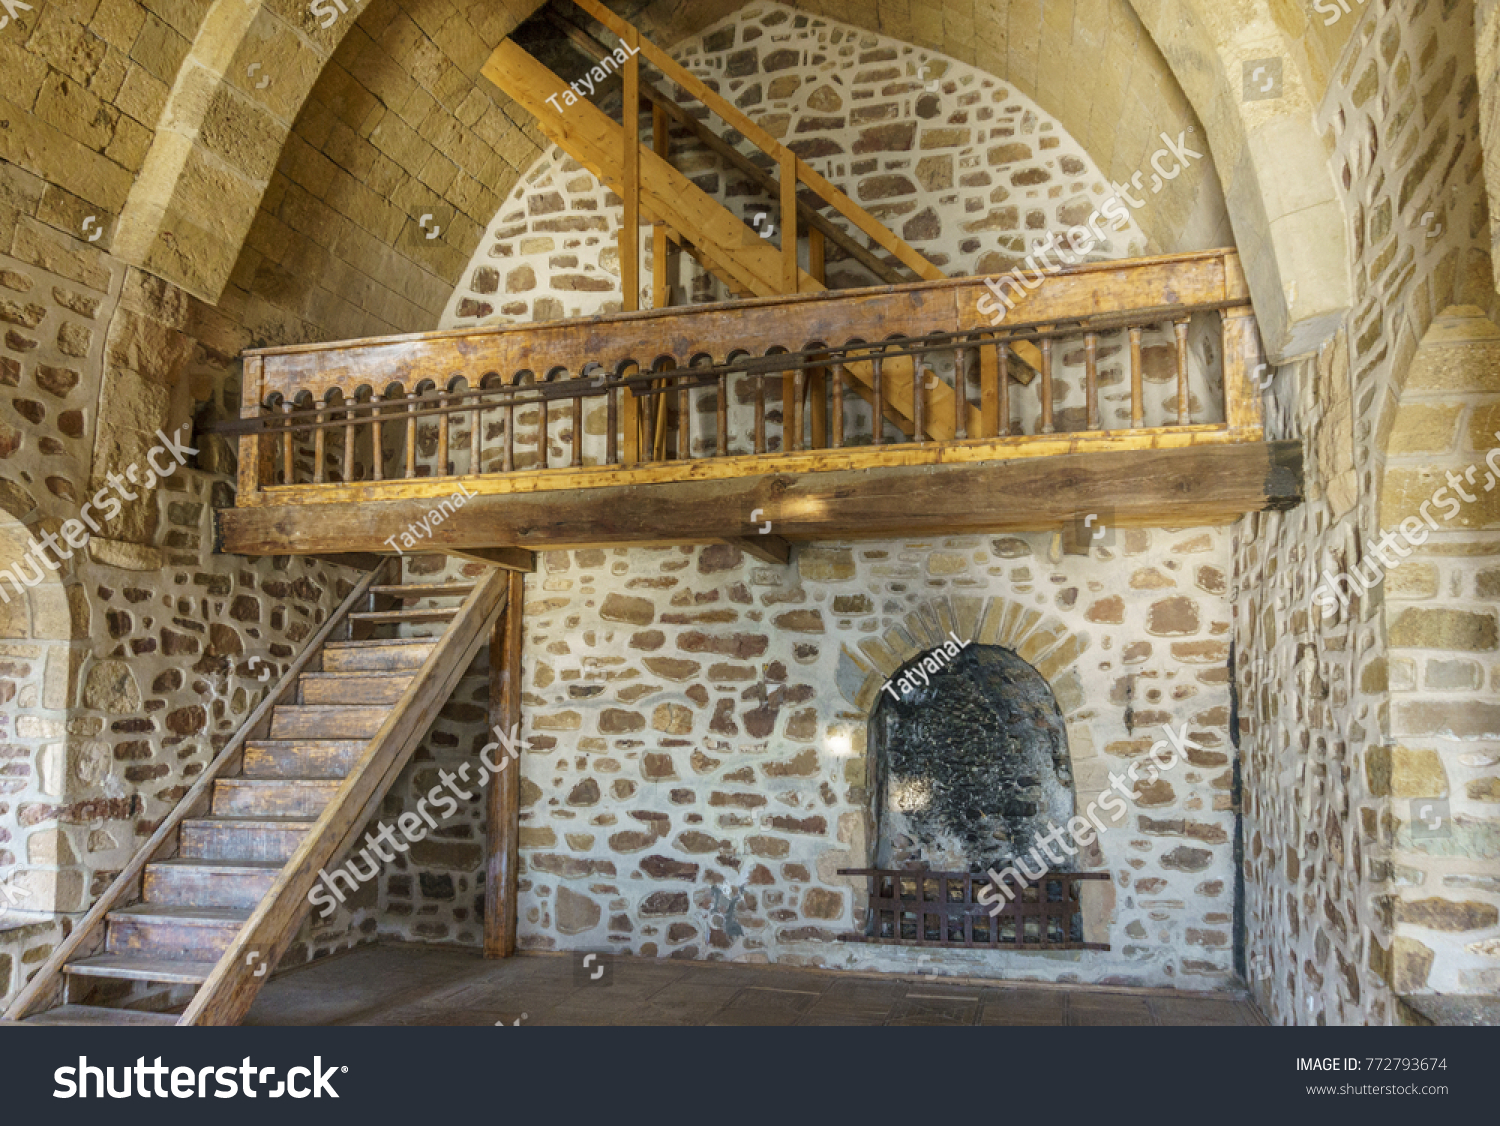 Inside Interior Room Old Castle Wooden Stock Photo Edit Now